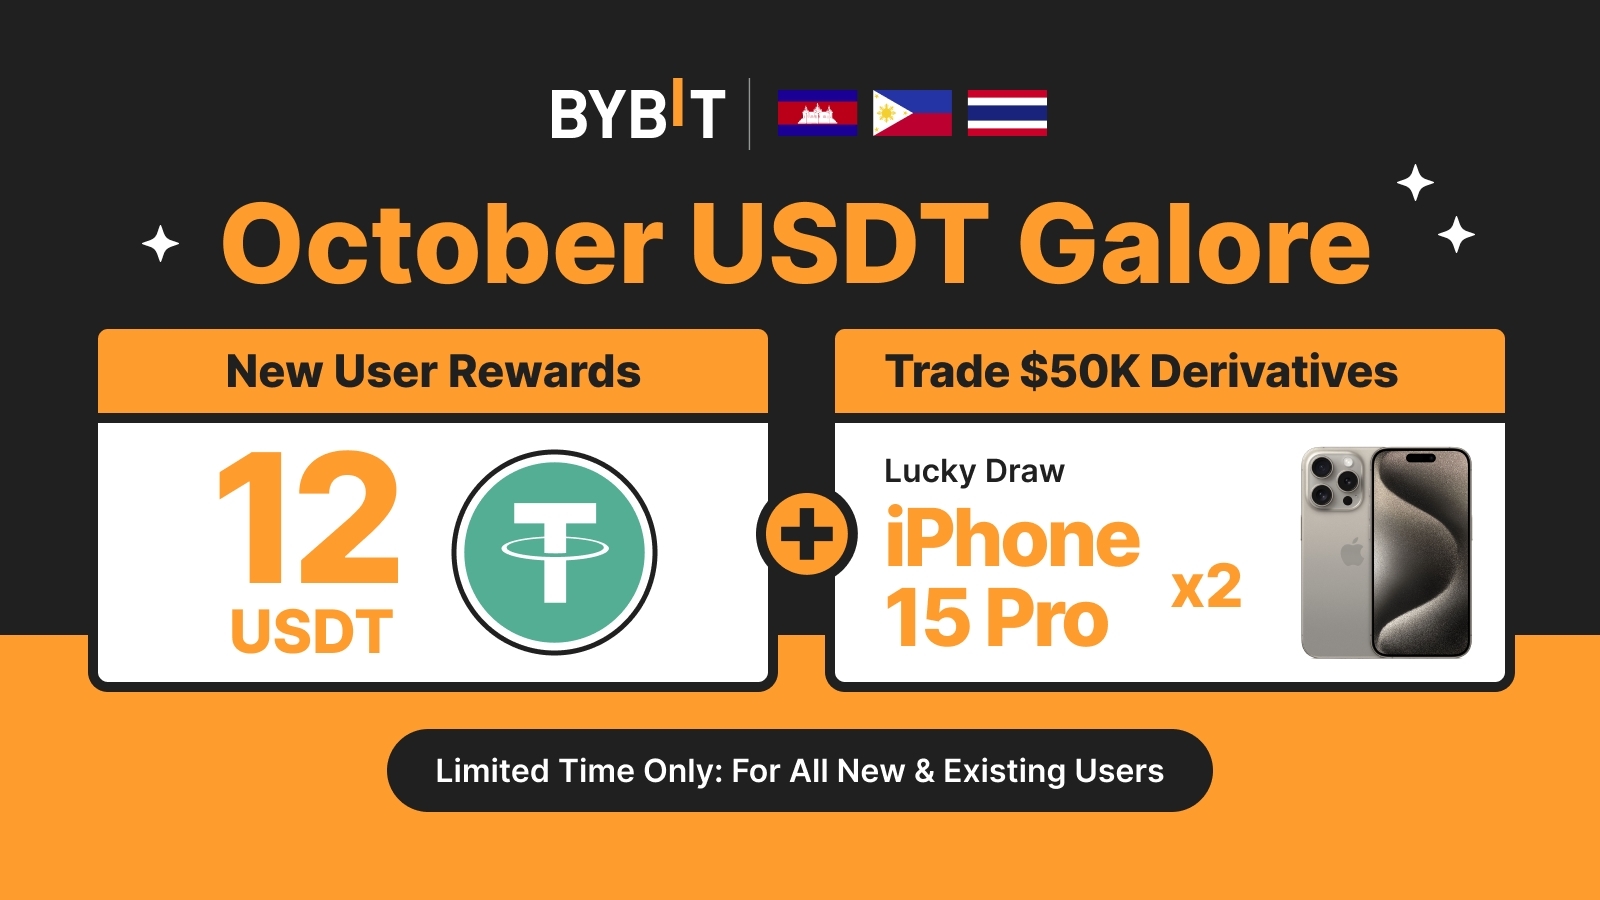 Bybit Announcement  Bybit Community Prediction Draw: Predict GAS Price and  Win 500 USDT! 🔮